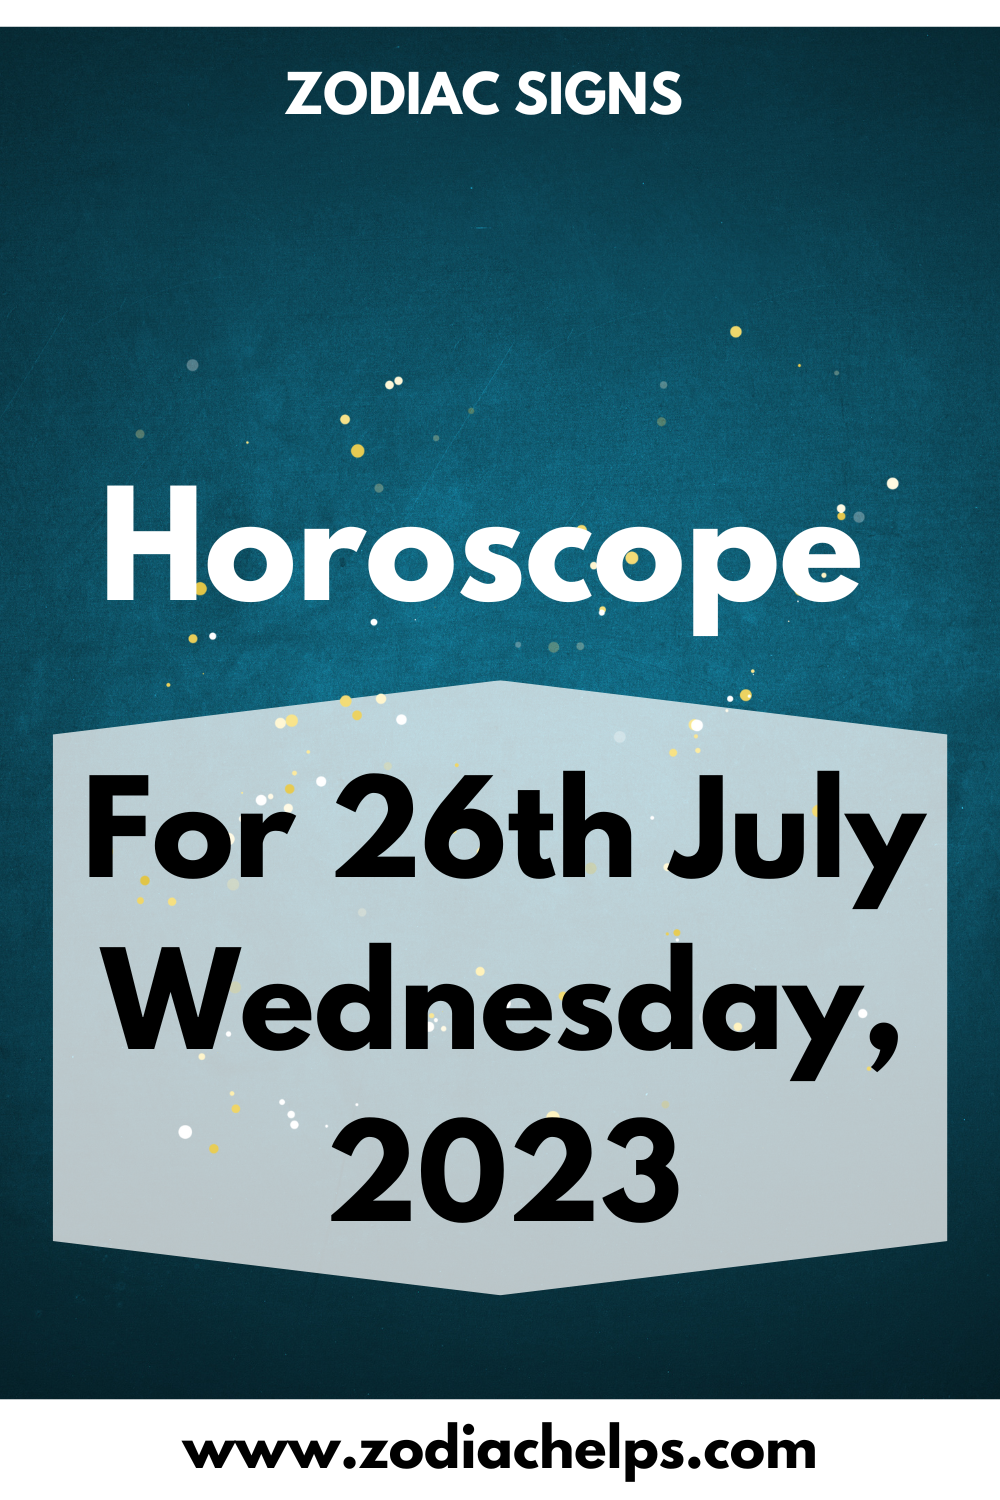 Horoscope for 26th July Wednesday, 2023